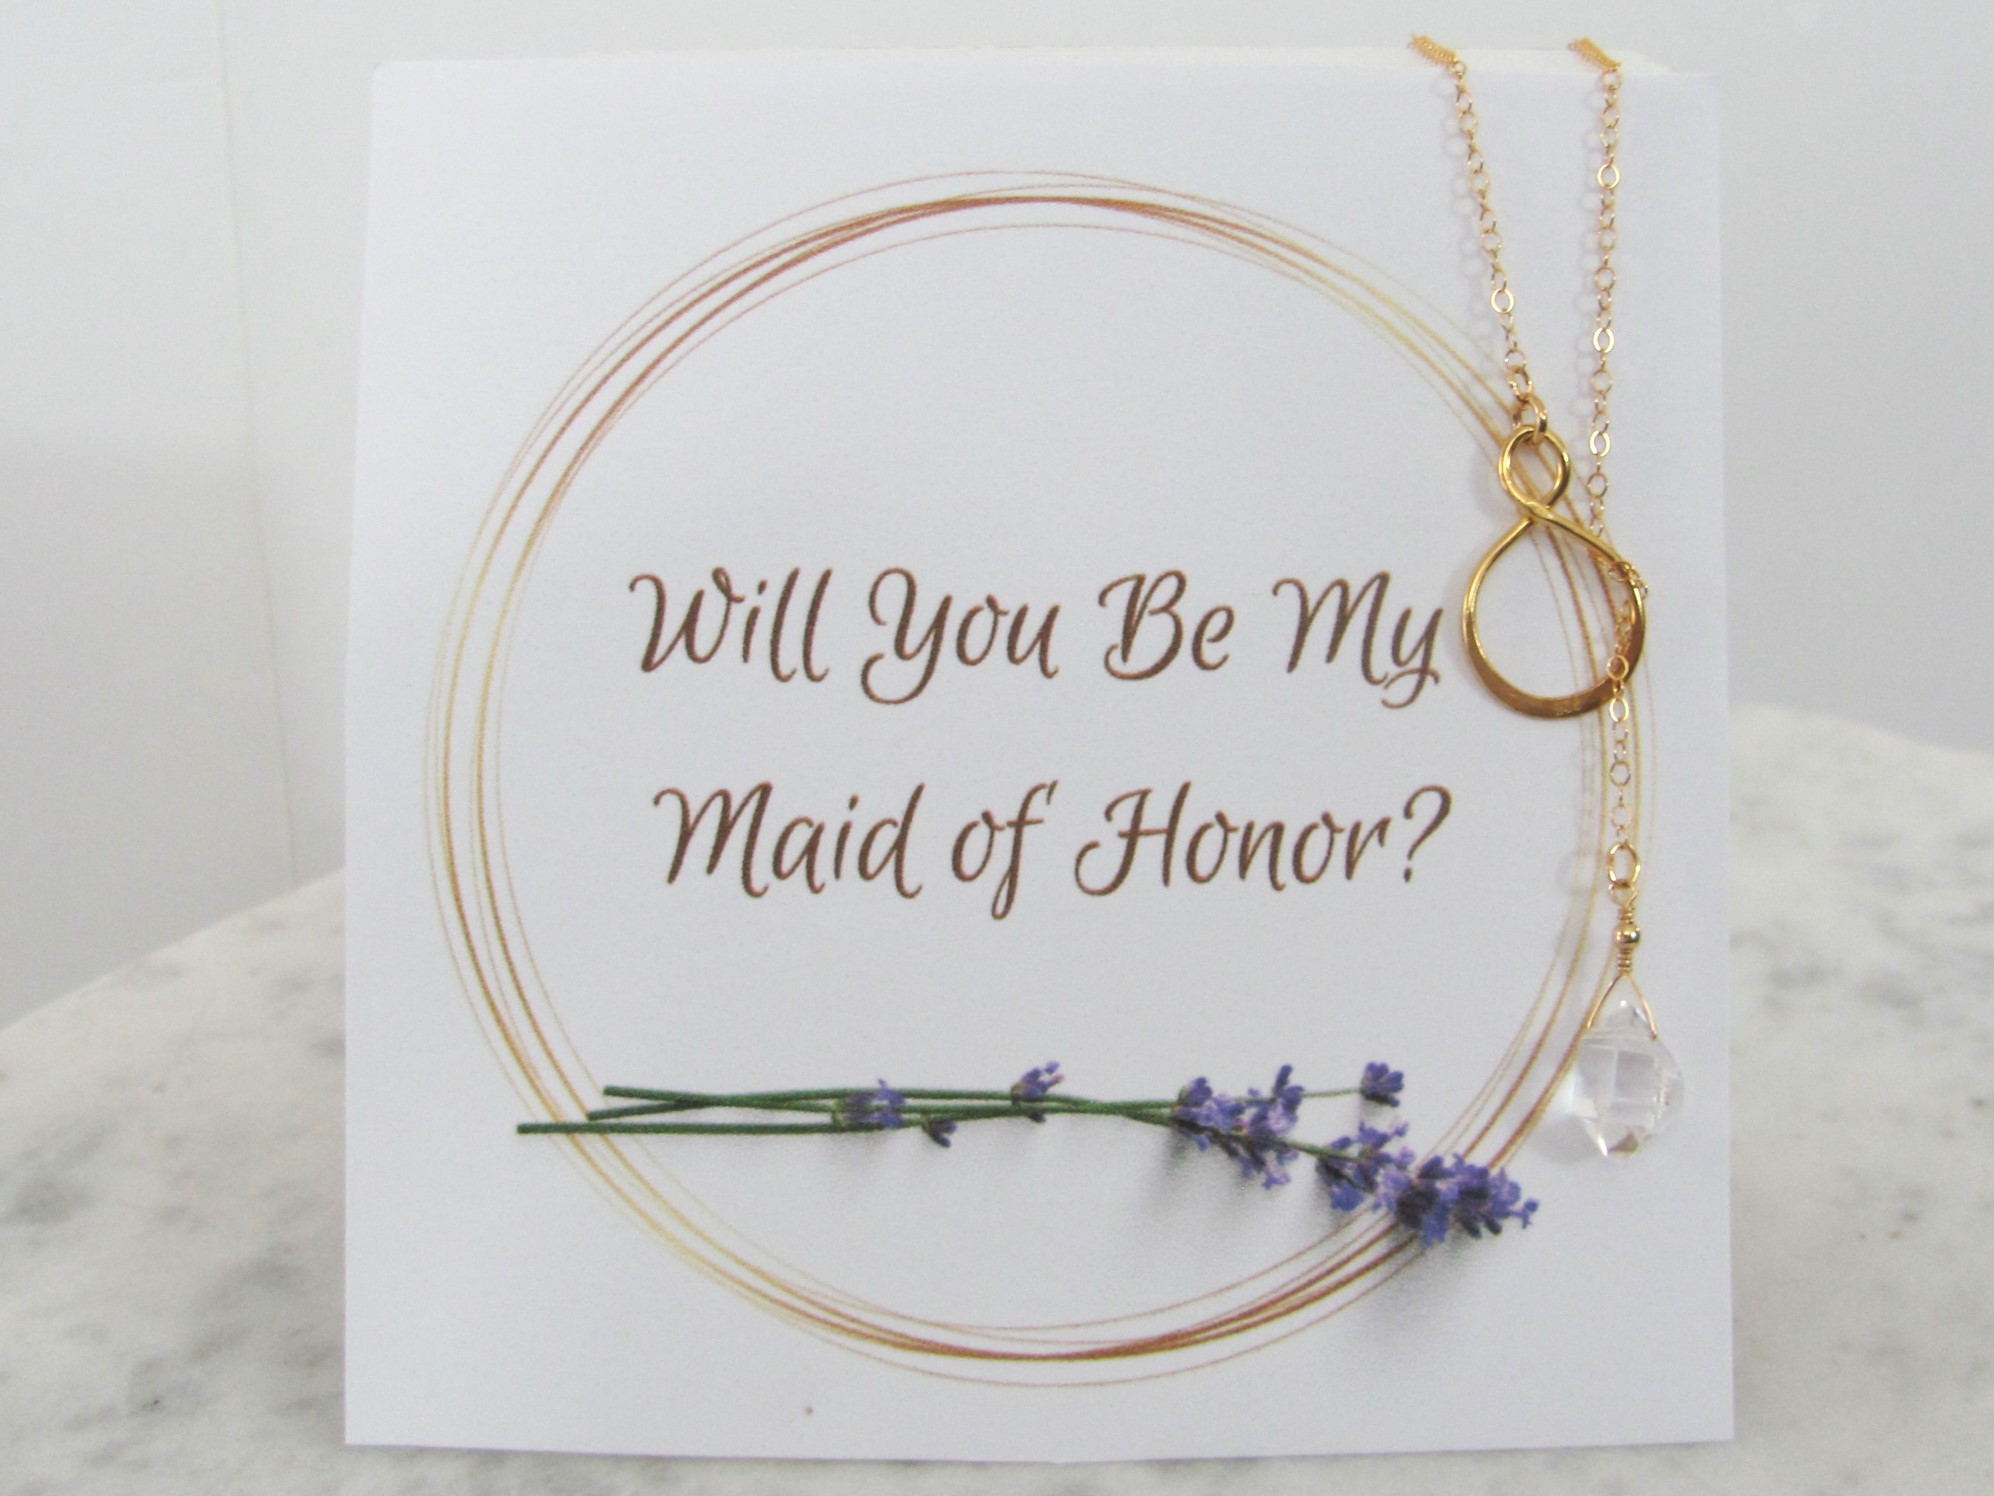 Maid of Honor Proposal Box with Herkimer Diamond Necklace